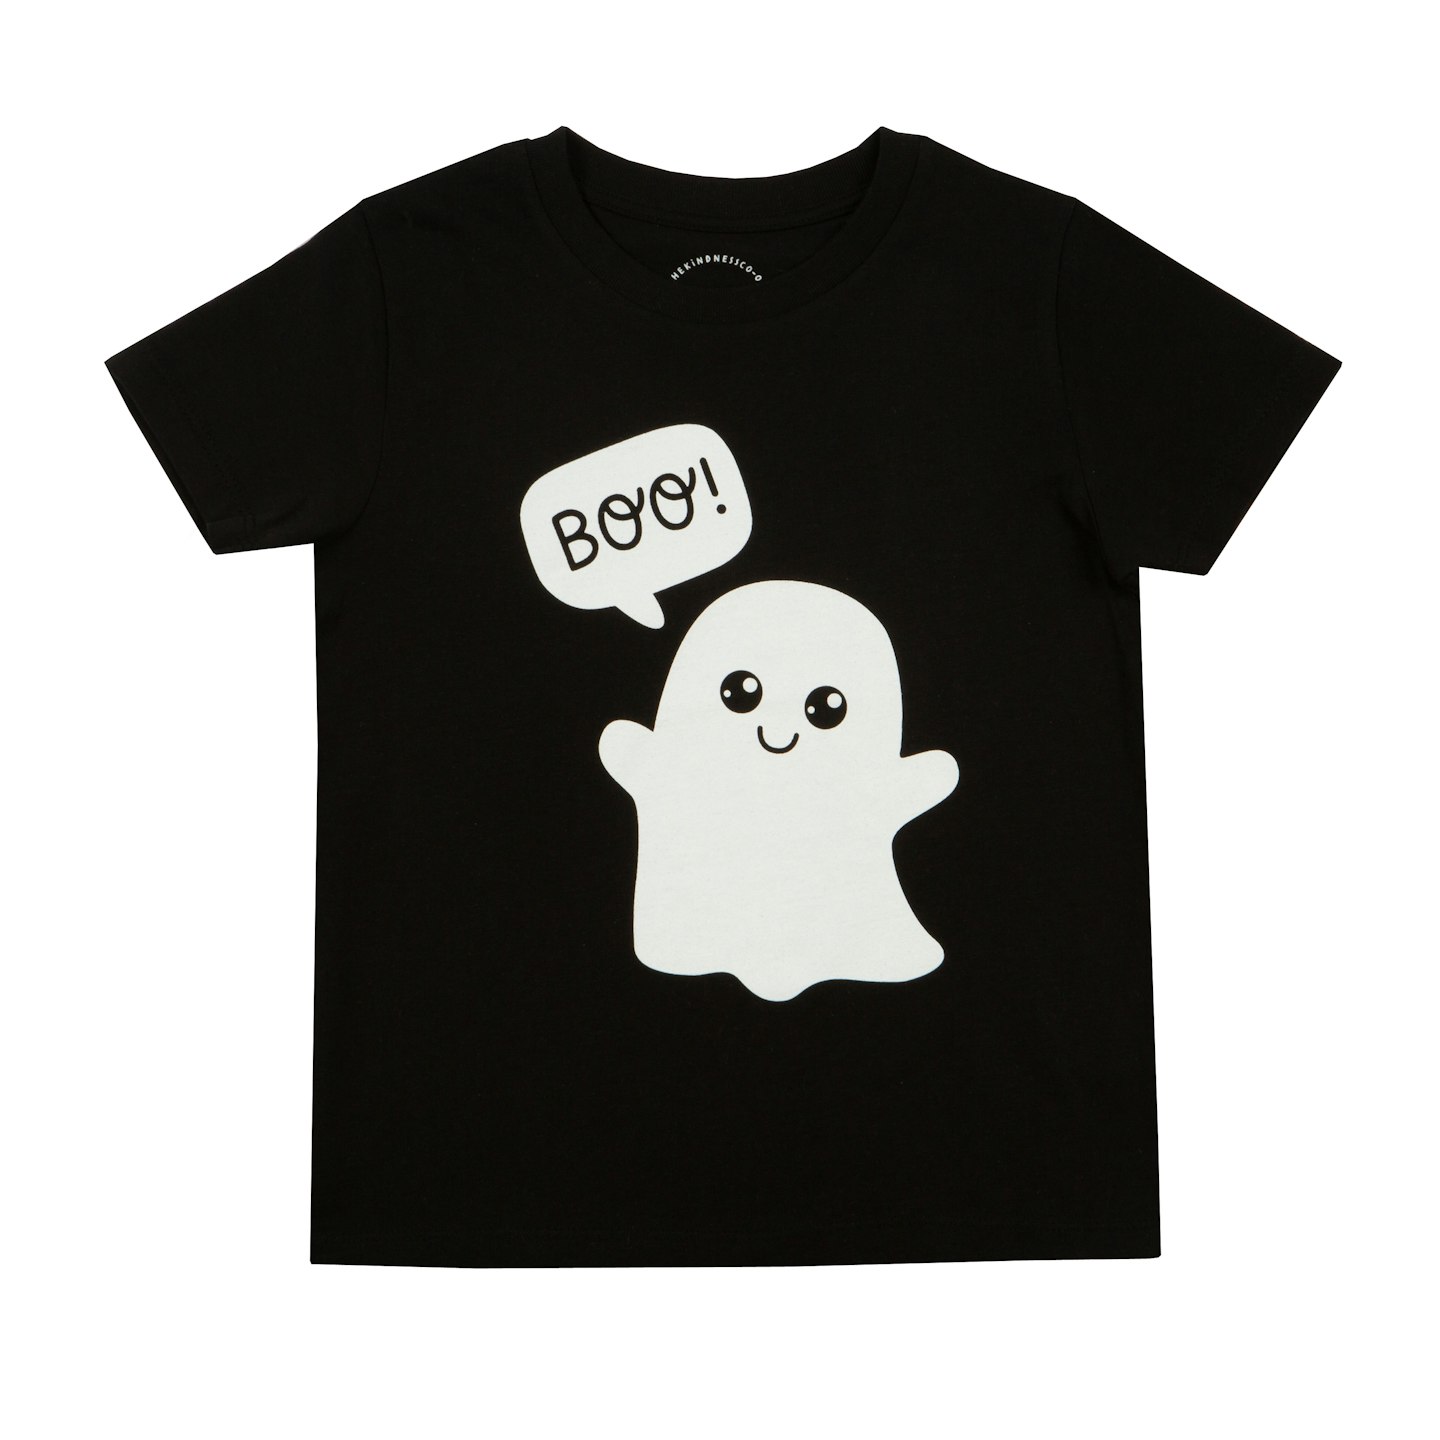 The Kindness Co-op Boo t-shirt